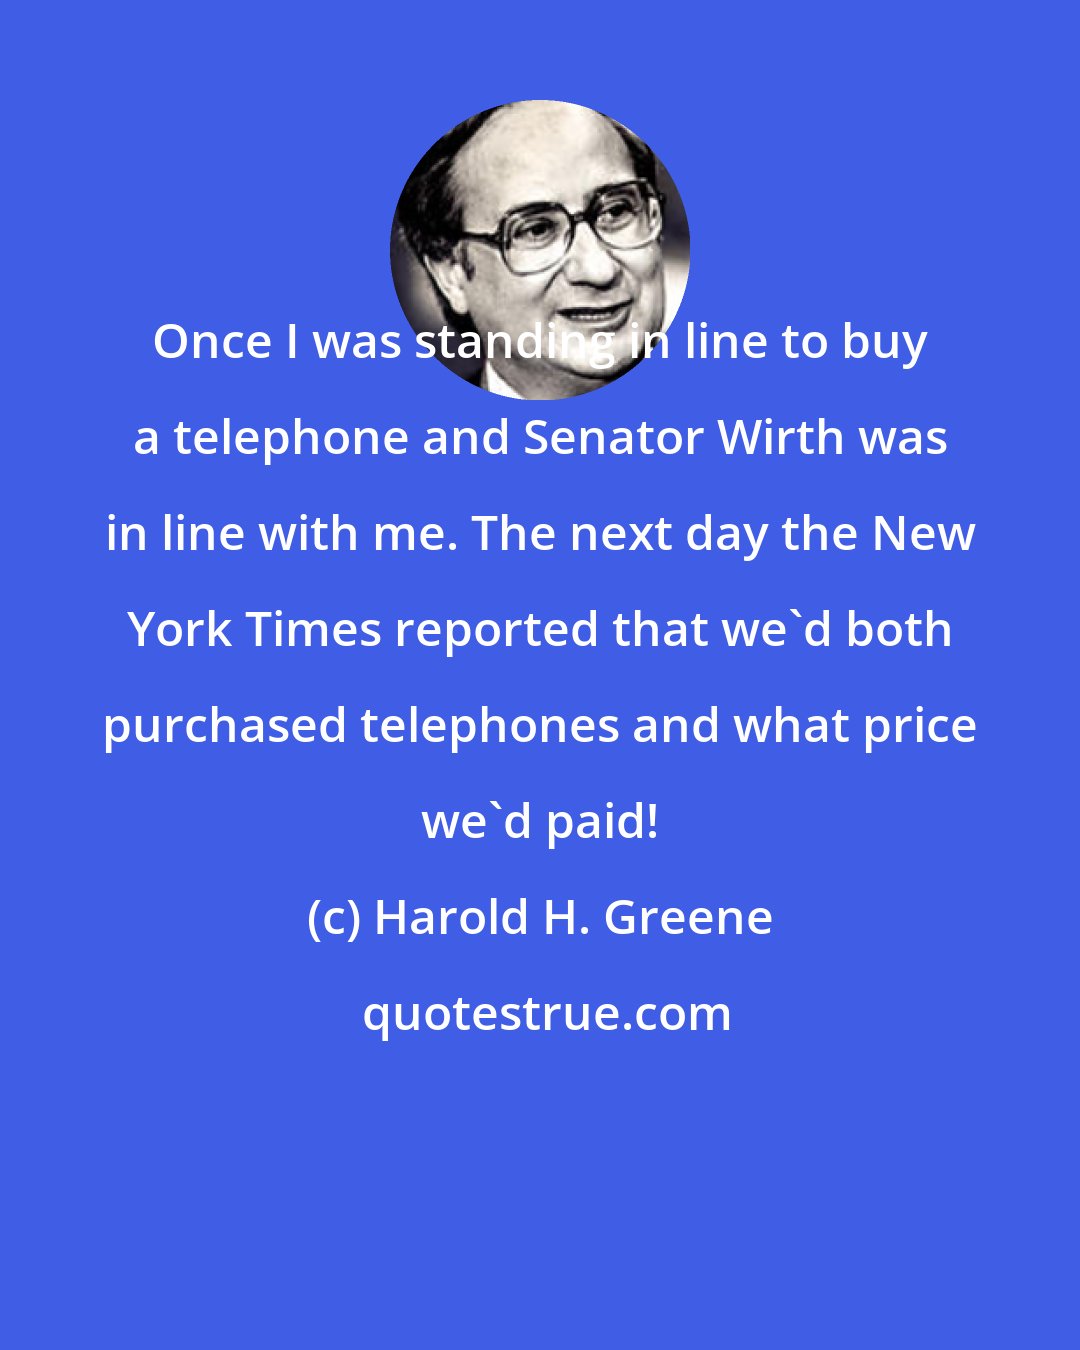 Harold H. Greene: Once I was standing in line to buy a telephone and Senator Wirth was in line with me. The next day the New York Times reported that we'd both purchased telephones and what price we'd paid!